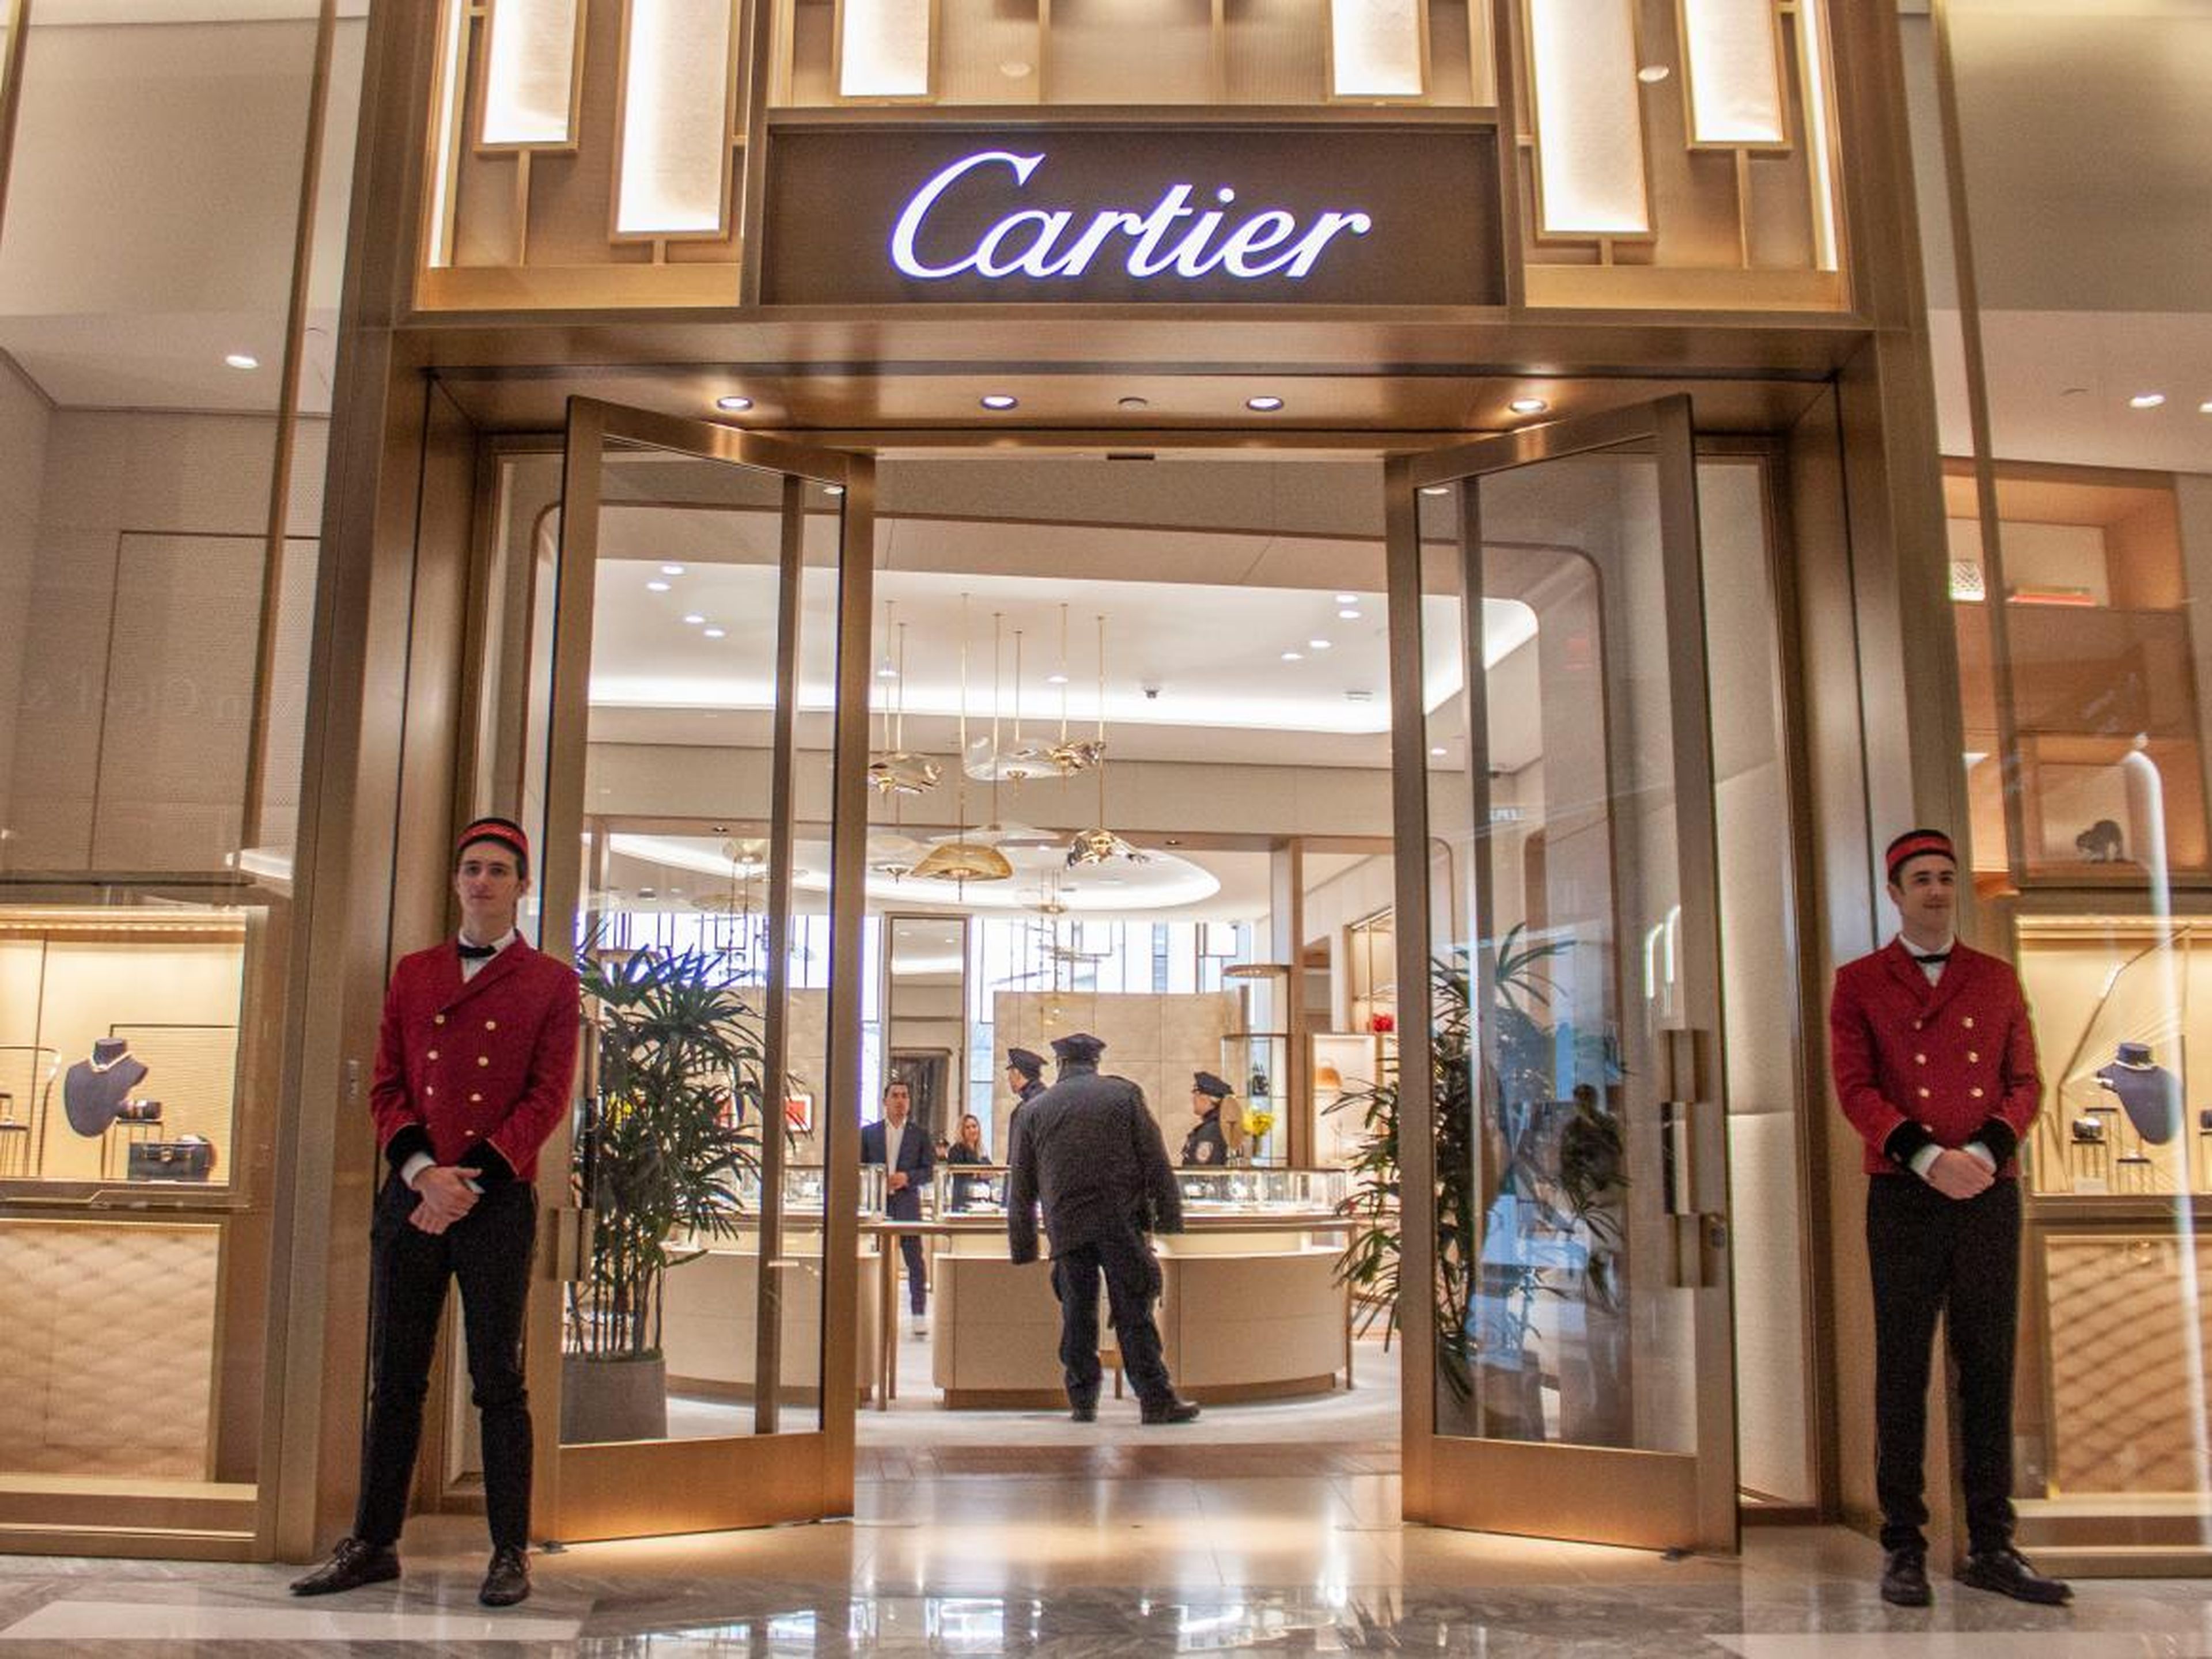 The seven-story shopping center, which the developers prefer to call a "vertical shopping experience" rather than a mall, includes dozens of luxury boutiques, from Cartier ...